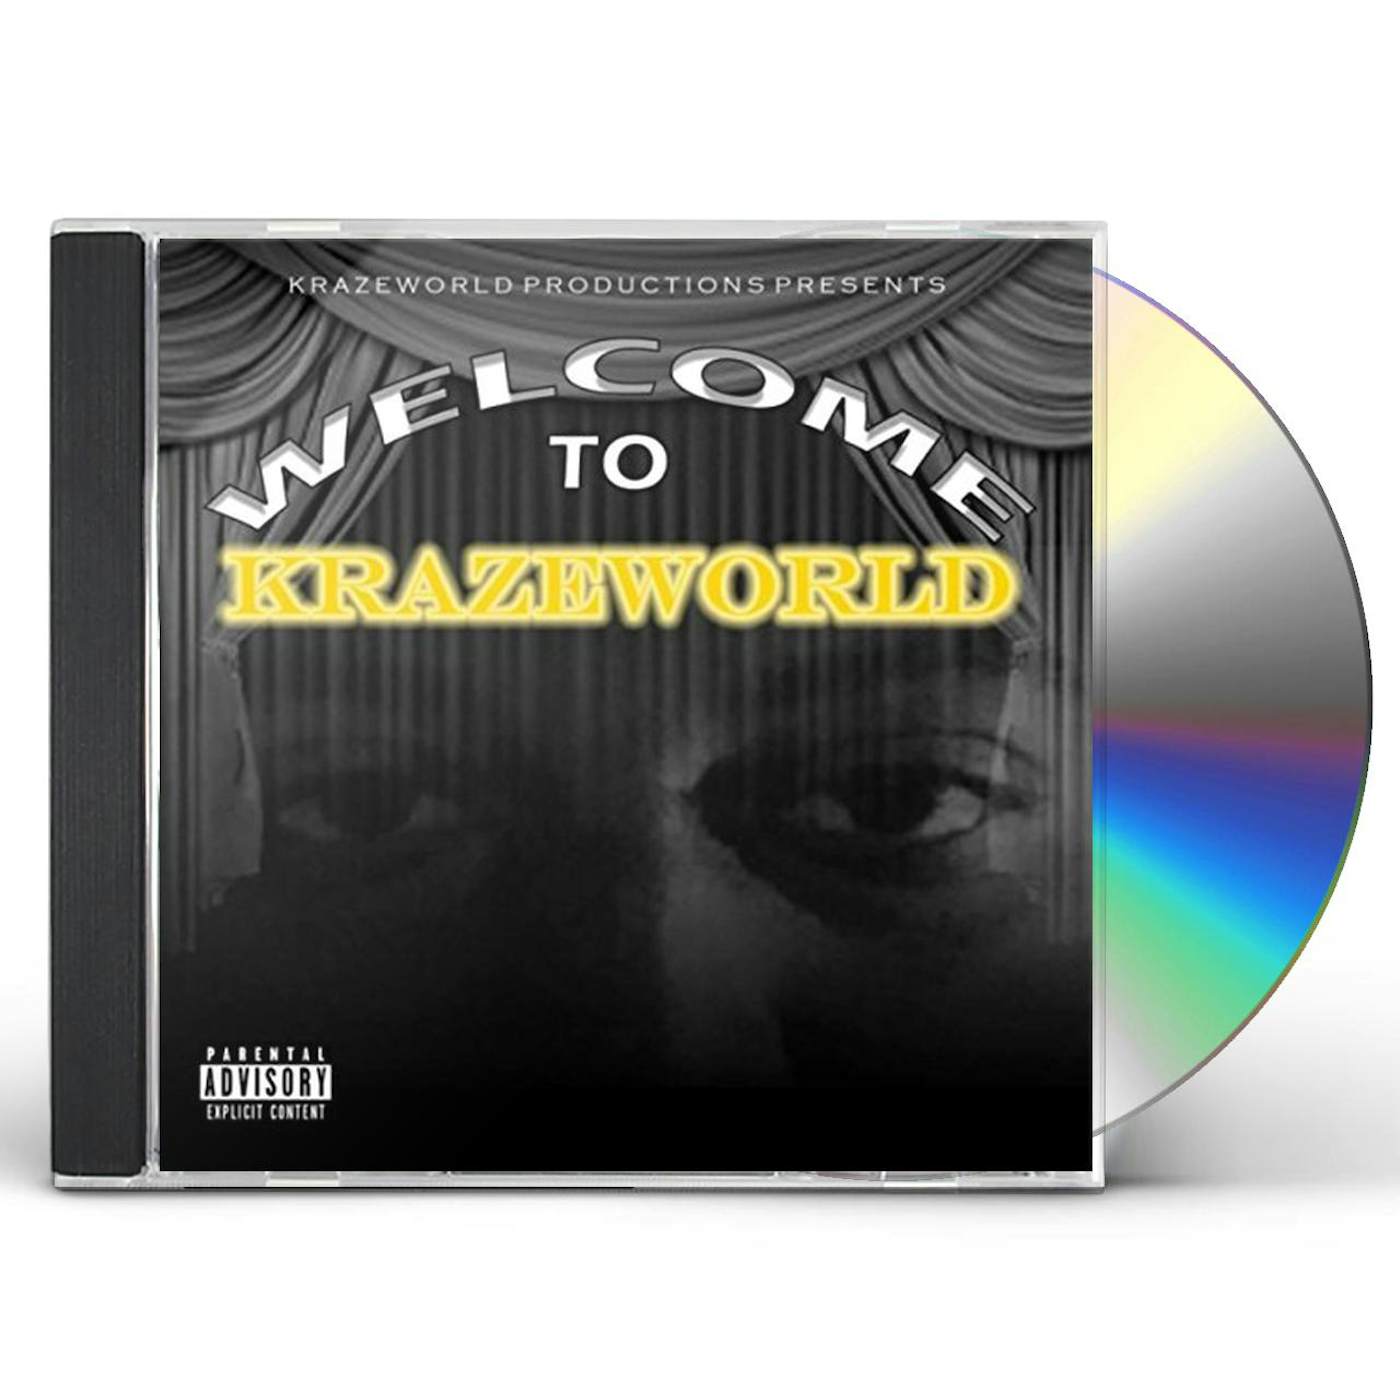 WELCOME TO KRAZEWORLD CD